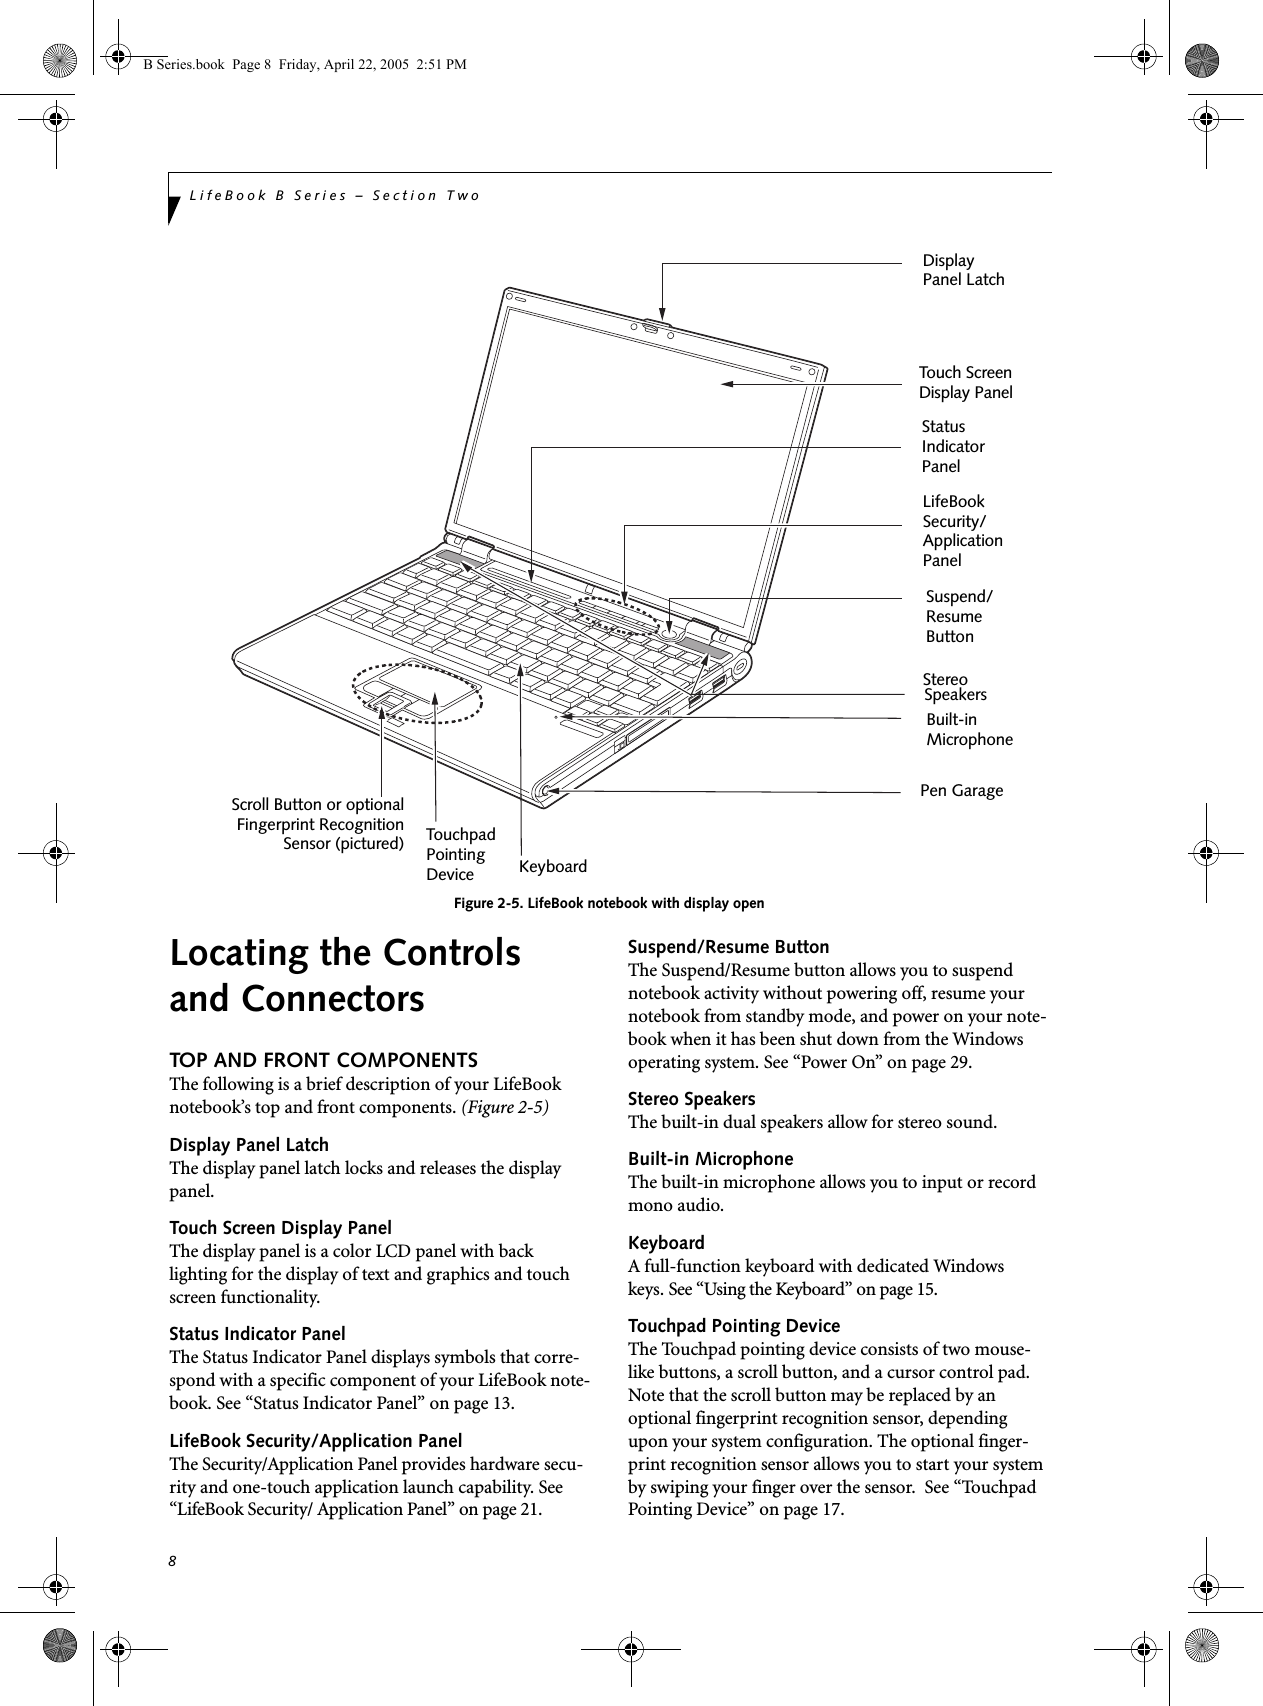 8LifeBook B Series – Section TwoFigure 2-5. LifeBook notebook with display openLocating the Controlsand ConnectorsTOP AND FRONT COMPONENTSThe following is a brief description of your LifeBook notebook’s top and front components. (Figure 2-5)Display Panel LatchThe display panel latch locks and releases the display panel. Touch Screen Display PanelThe display panel is a color LCD panel with back lighting for the display of text and graphics and touch screen functionality. Status Indicator PanelThe Status Indicator Panel displays symbols that corre-spond with a specific component of your LifeBook note-book. See “Status Indicator Panel” on page 13. LifeBook Security/Application PanelThe Security/Application Panel provides hardware secu-rity and one-touch application launch capability. See “LifeBook Security/ Application Panel” on page 21. Suspend/Resume ButtonThe Suspend/Resume button allows you to suspend notebook activity without powering off, resume your notebook from standby mode, and power on your note-book when it has been shut down from the Windows operating system. See “Power On” on page 29.Stereo SpeakersThe built-in dual speakers allow for stereo sound. Built-in MicrophoneThe built-in microphone allows you to input or record mono audio.KeyboardA full-function keyboard with dedicated Windowskeys. See “Using the Keyboard” on page 15.Touchpad Pointing DeviceThe Touchpad pointing device consists of two mouse-like buttons, a scroll button, and a cursor control pad. Note that the scroll button may be replaced by an optional fingerprint recognition sensor, depending upon your system configuration. The optional finger-print recognition sensor allows you to start your system by swiping your finger over the sensor.  See “Touchpad Pointing Device” on page 17.DisplayStatusKeyboardLifeBookTouchpad StereoPanel Latch IndicatorPanel Security/ApplicationPanel Pen GarageSuspend/ResumeButtonTouch ScreenDisplay PanelScroll Button or optionalFingerprint RecognitionSensor (pictured)Built-inMicrophonePointing DeviceSpeakersB Series.book  Page 8  Friday, April 22, 2005  2:51 PM